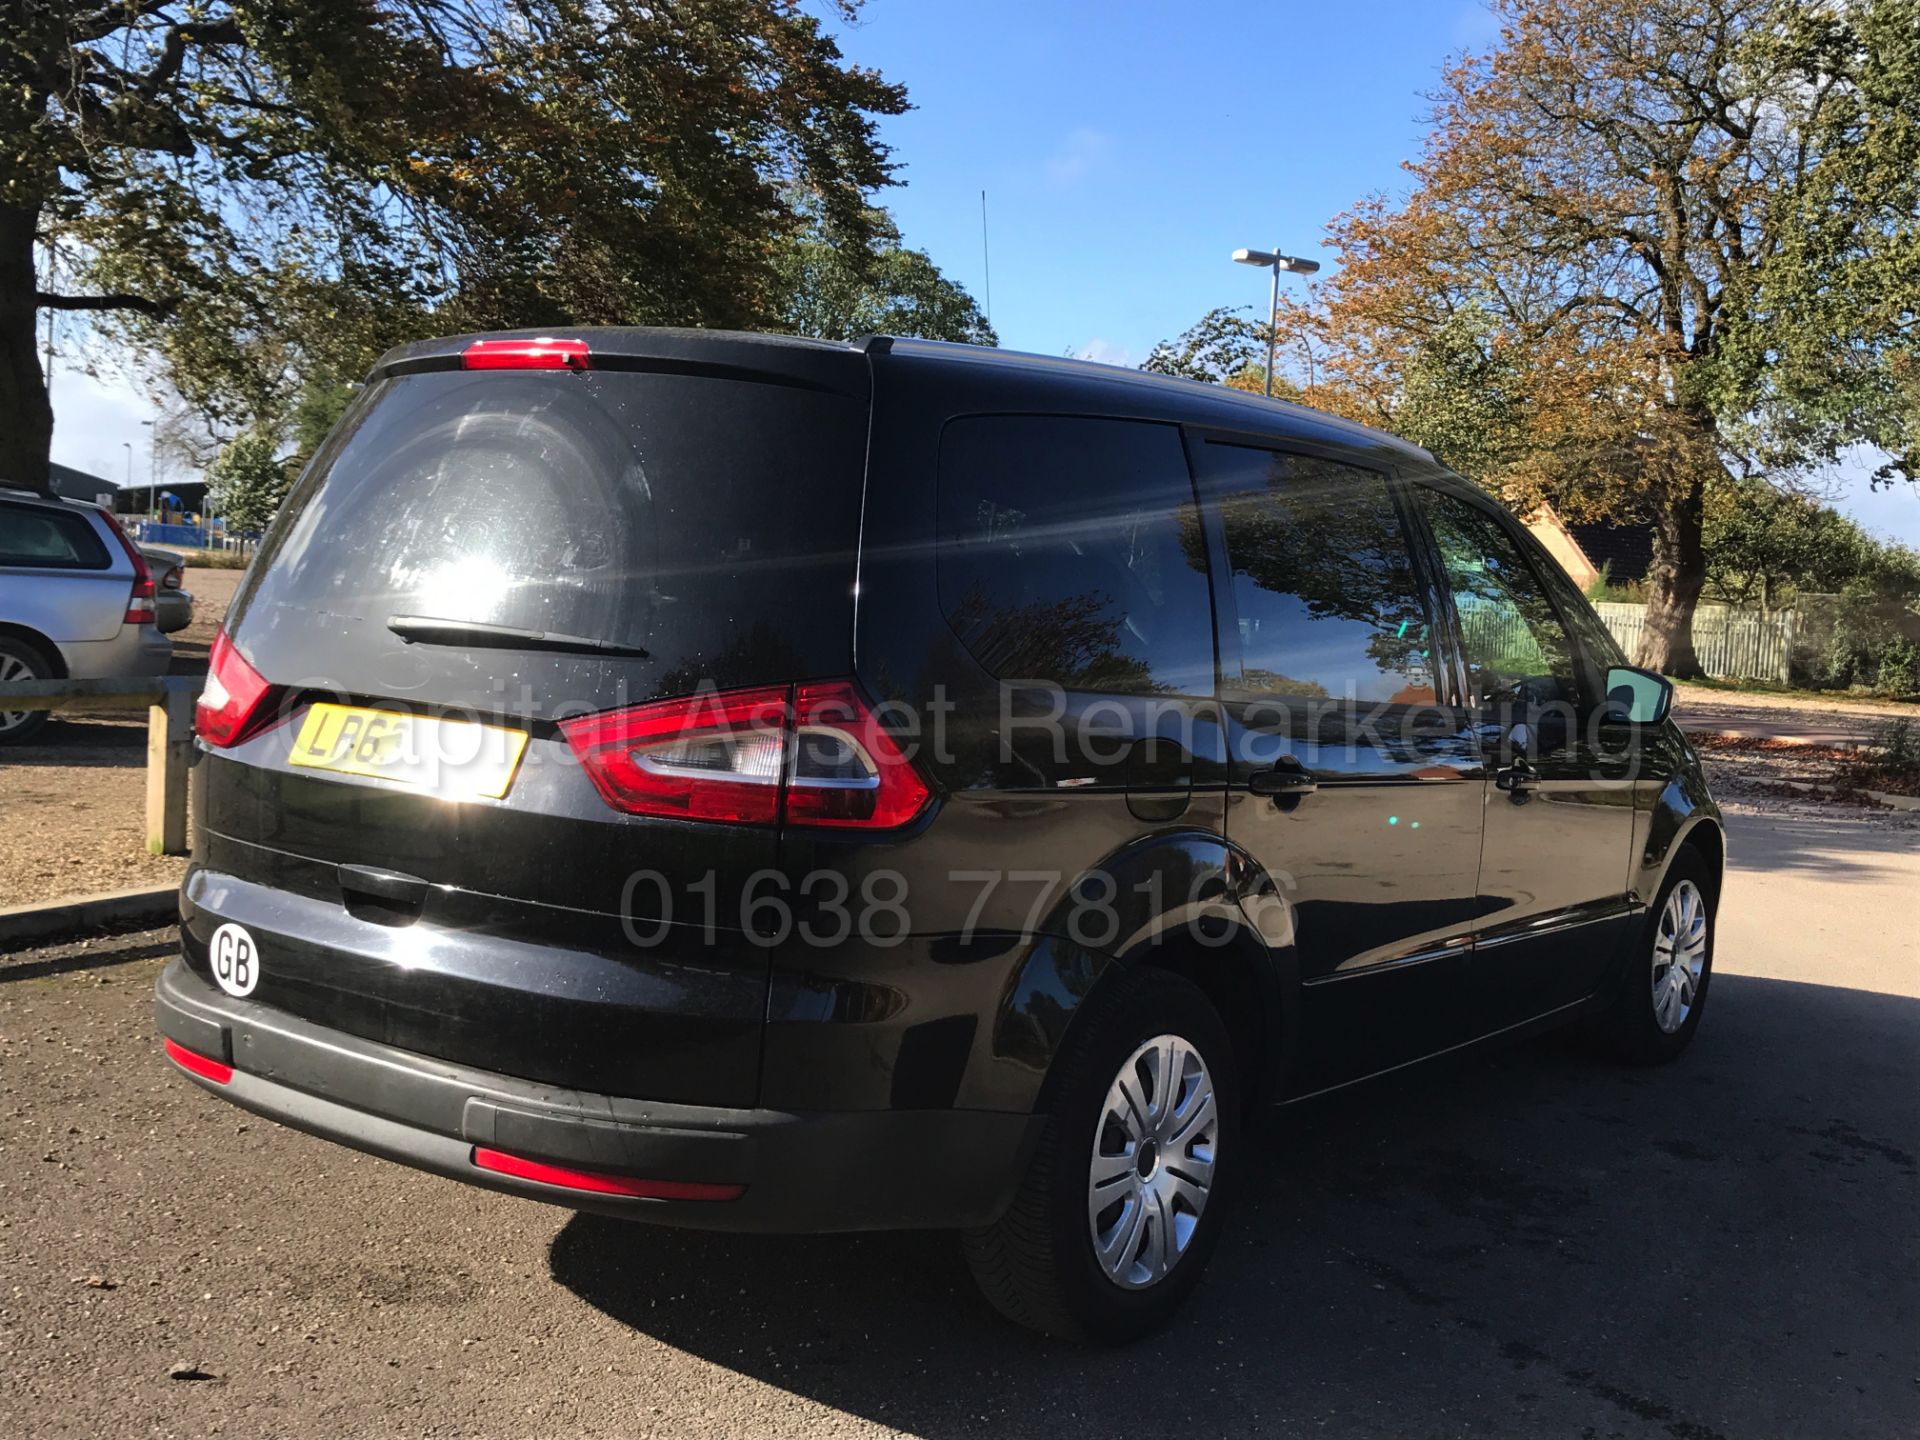 (ON SALE) FORD GALAXY 'ZETEC' 7 SEATER MPV (2014 MODEL) '2.0 TDCI -140 BHP' (1 OWNER) *FULL HISTORY* - Image 6 of 28